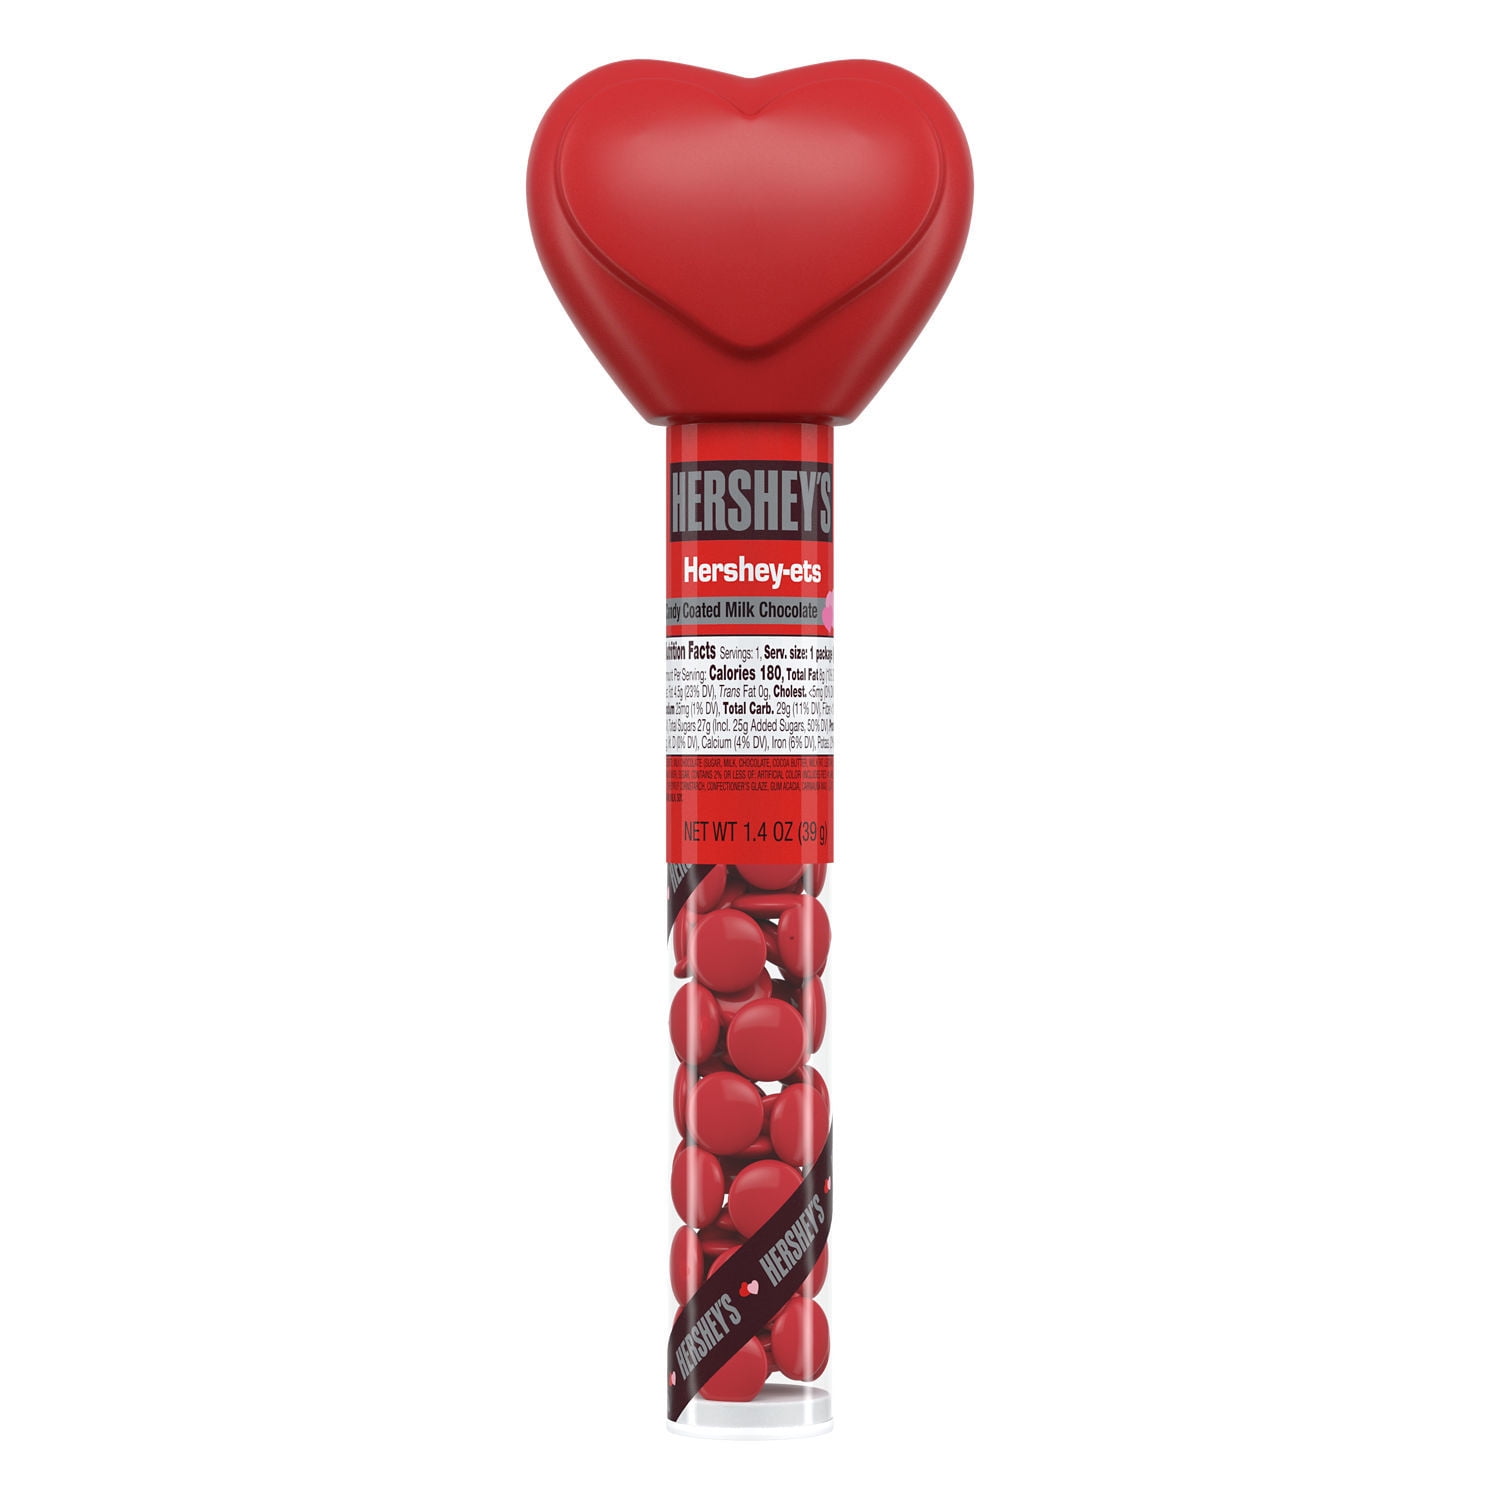 HERSHEY'S, HERSHEY-ETS Candy Coated Milk Chocolate Candy, Valentine's Day, 1.4 oz, Heart Topped Filled Plastic Cane